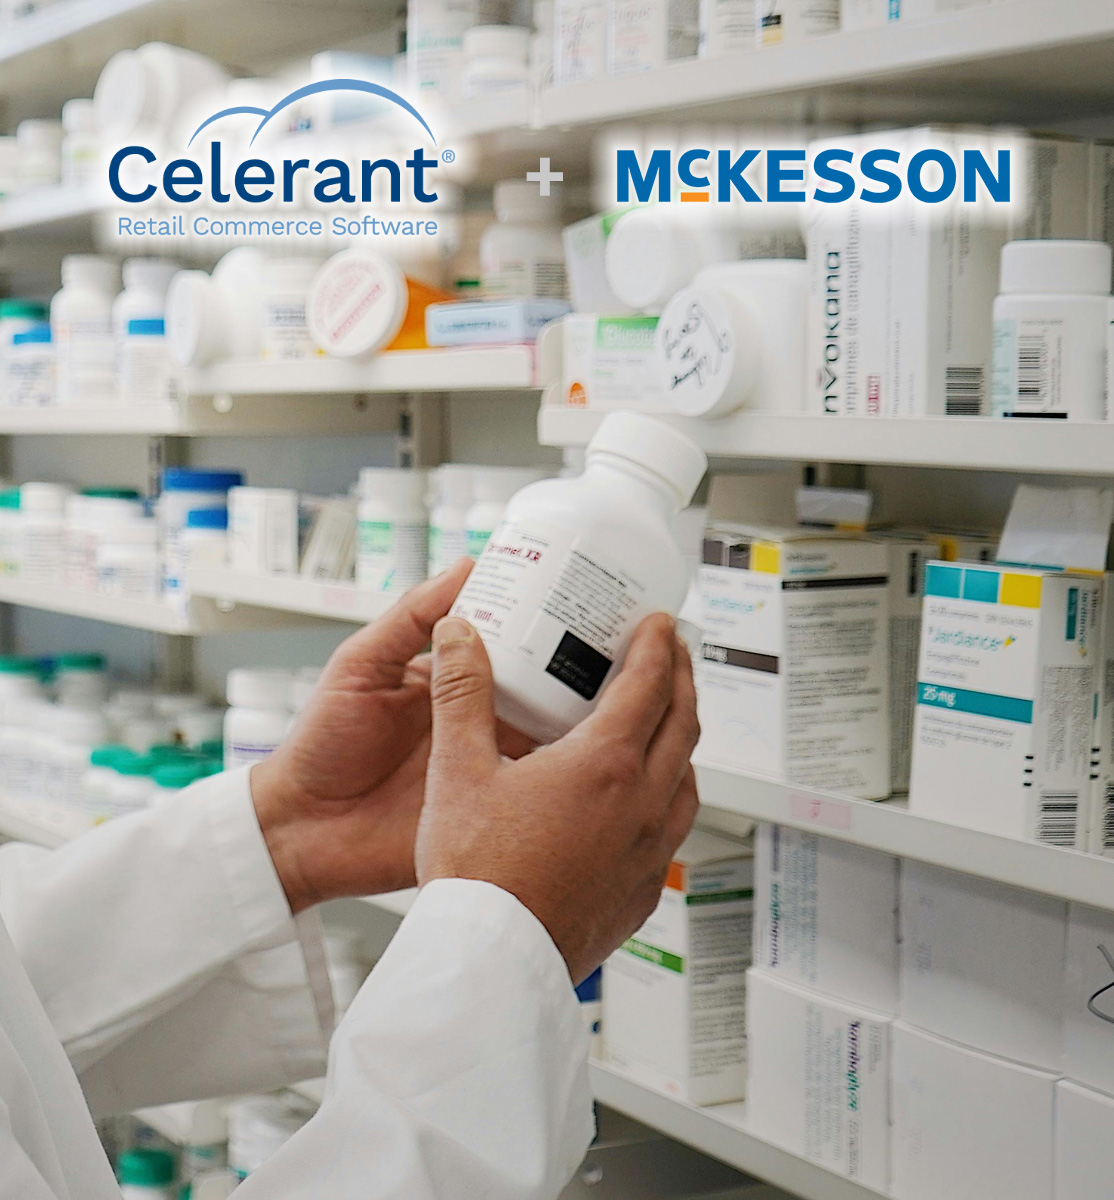 Celerant and McKesson in a pharmacy